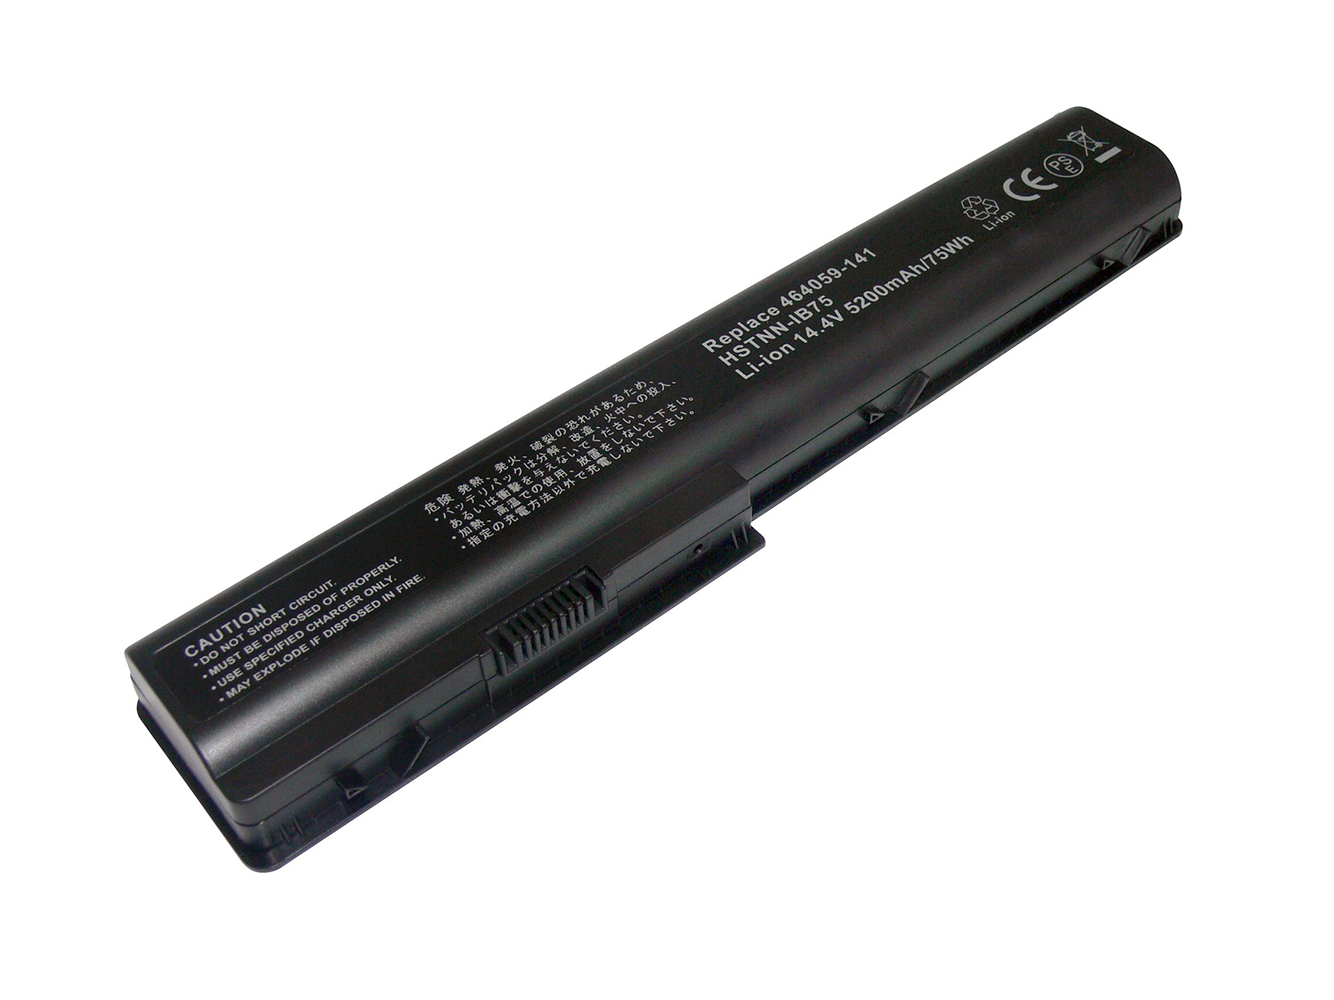 464059-121, 464059-141 replacement Laptop Battery for HP HDX X18-1000, HDX X18-1100, 5200mAh, 14.40V